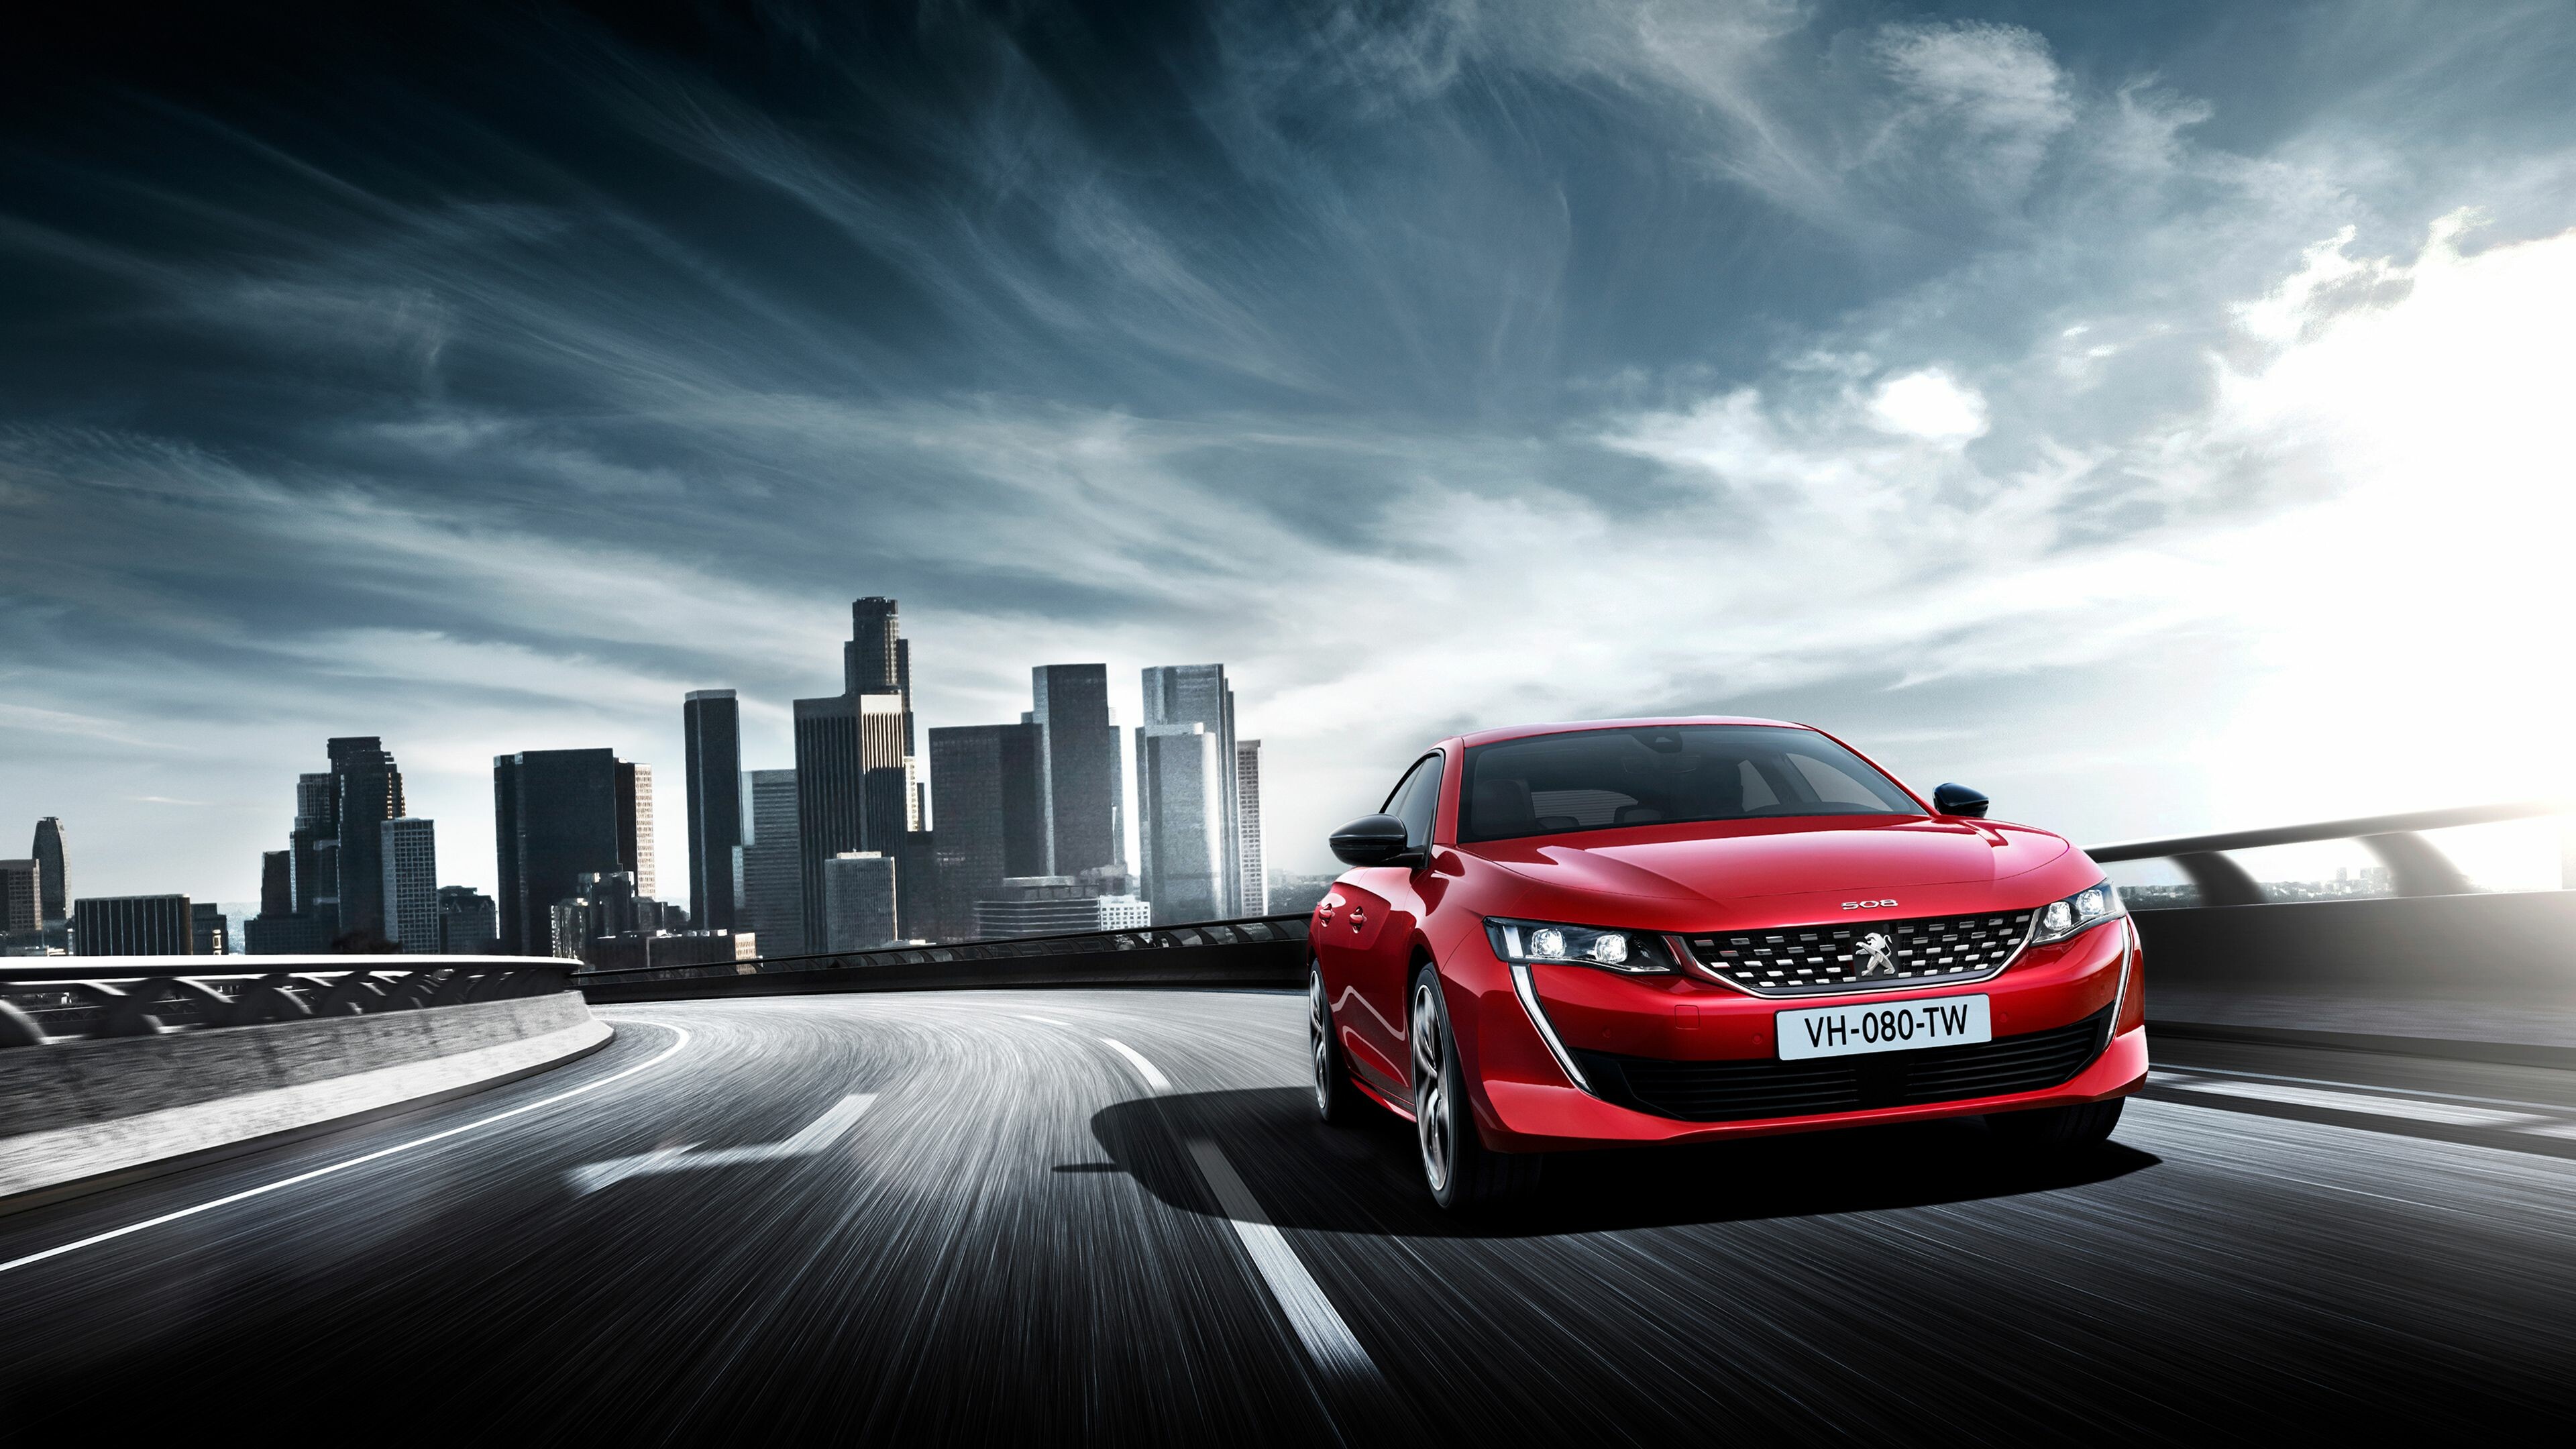 Peugeot: Model 508, A French brand of automobiles owned by Stellantis. 3840x2160 4K Wallpaper.